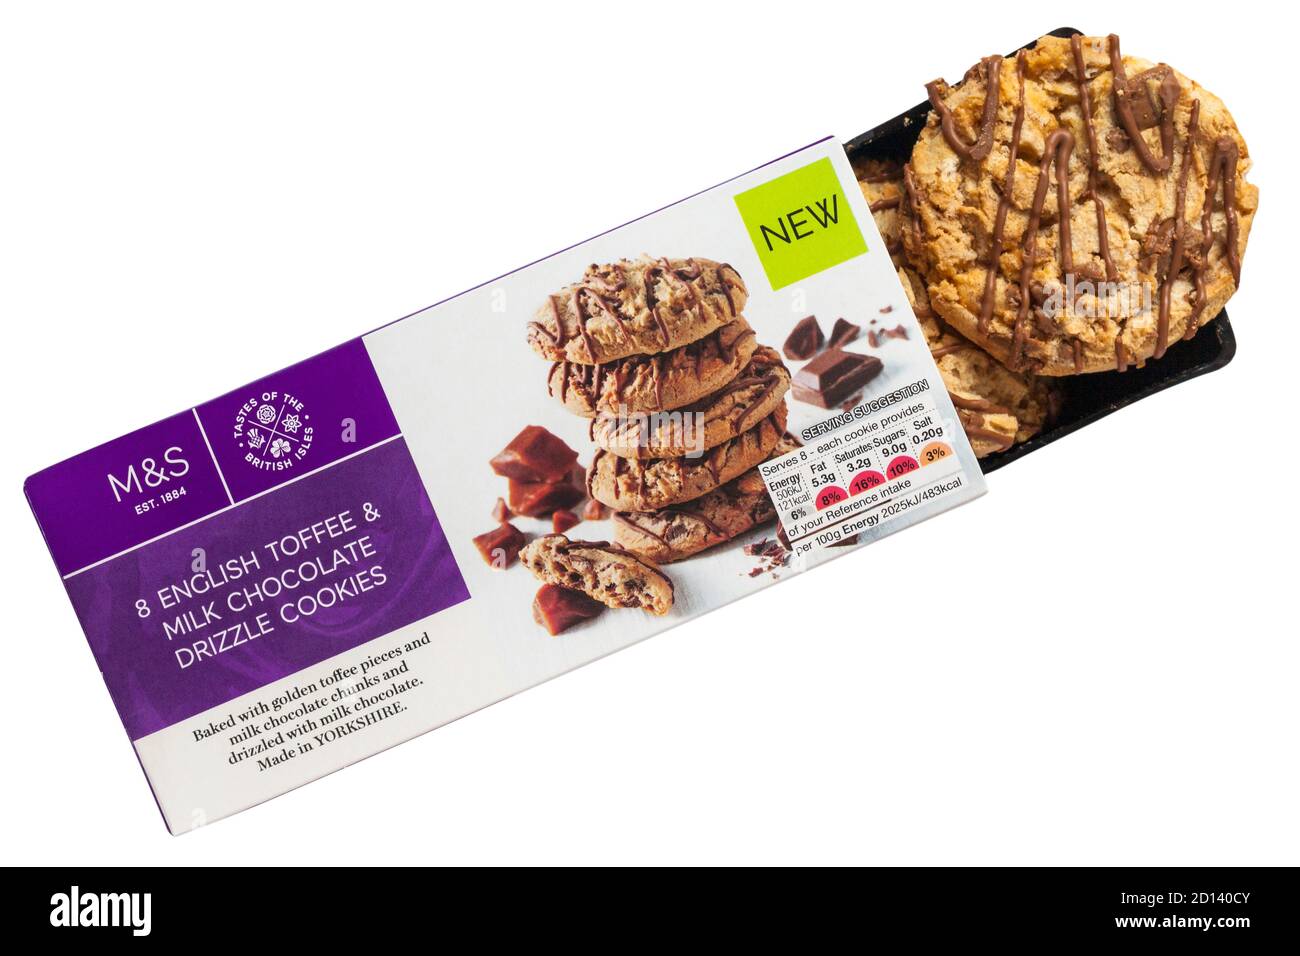 Box of M&S 8 English Toffee & Milk Chocolate Drizzle Cookies opened to show contents isolated on white background - Made in Yorkshire Stock Photo